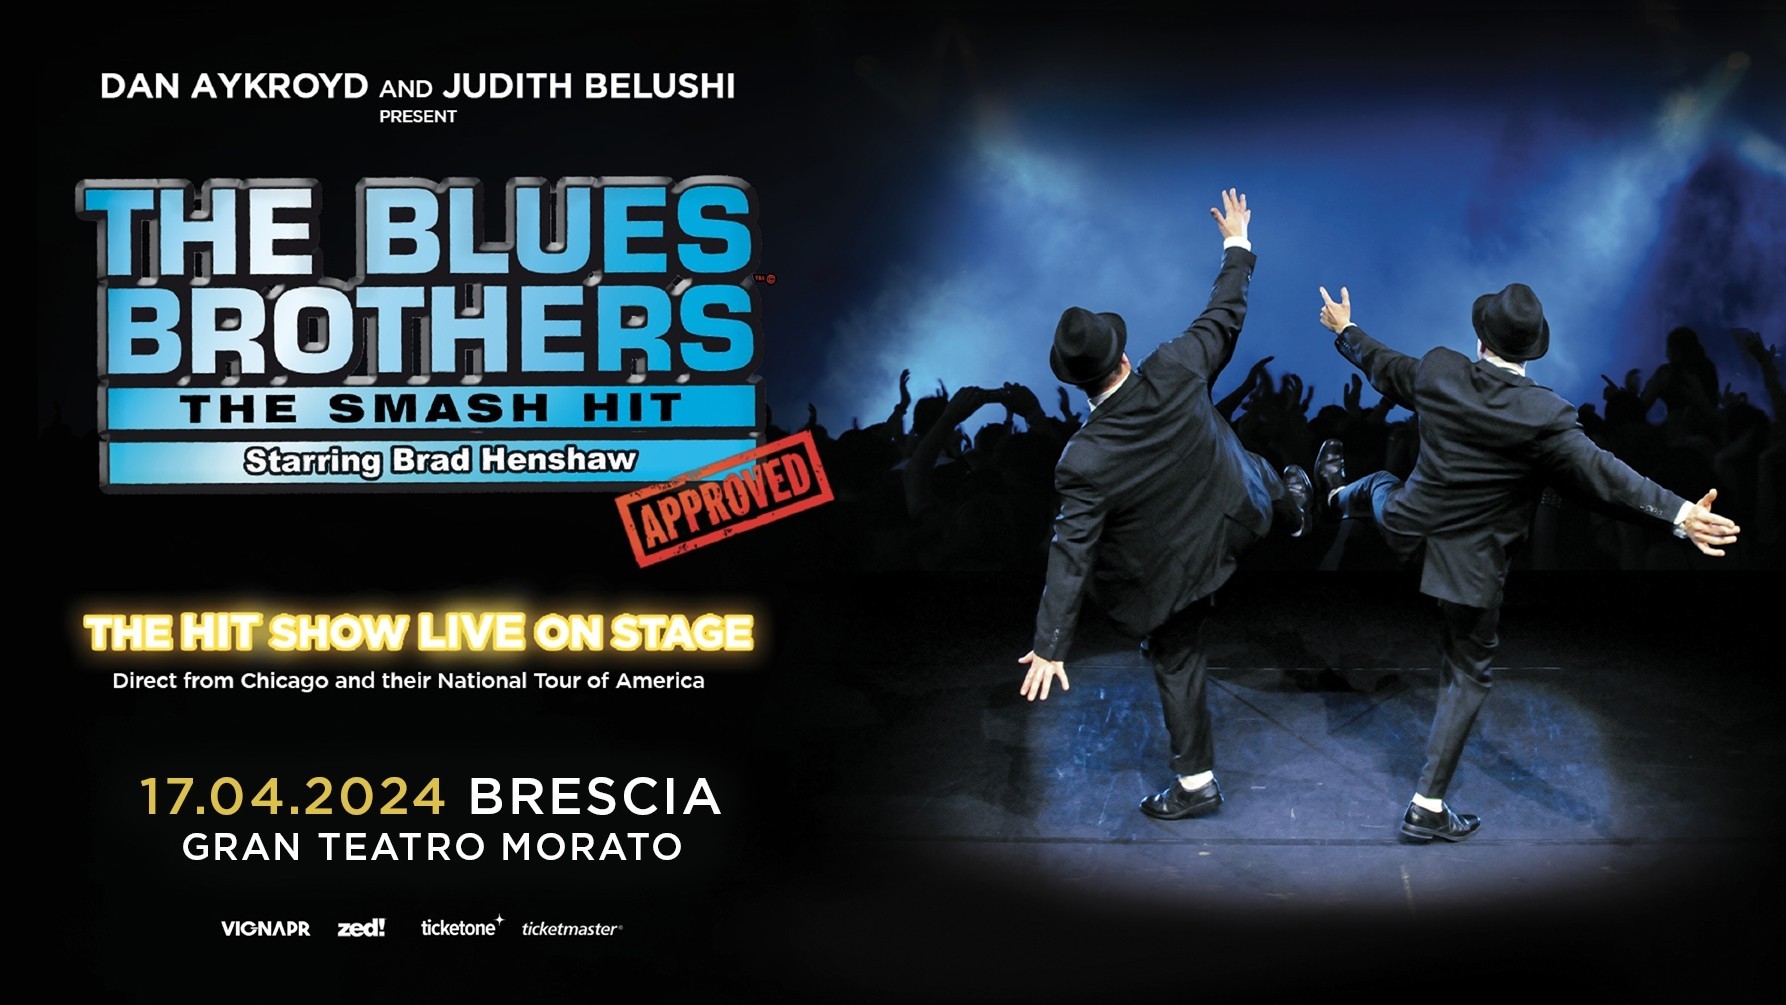 The Blues Brothers - The Smash Hit - Starring Brad Henshaw